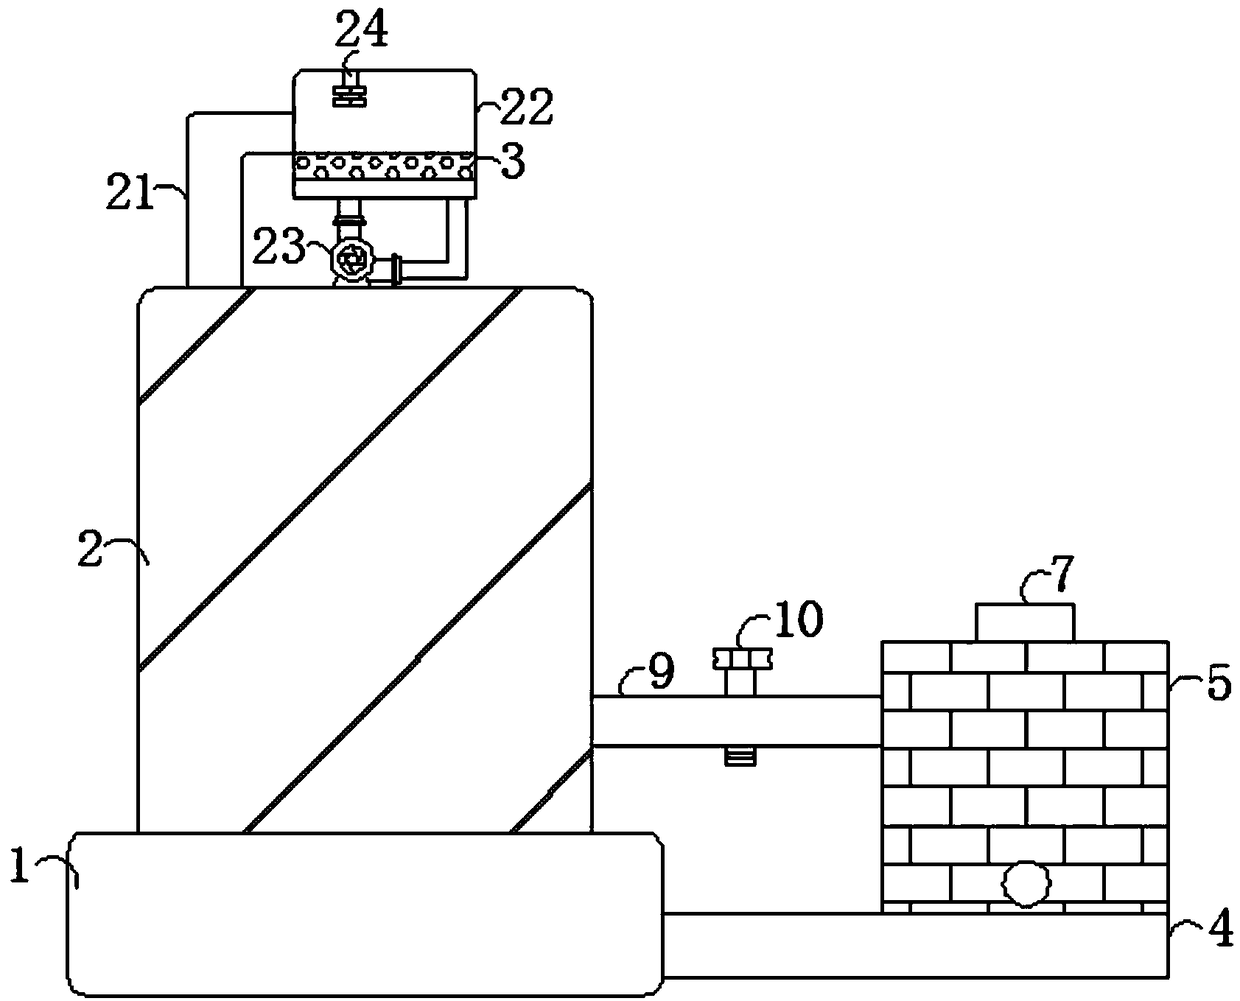 Environmental-friendly industrial furnace with purification function